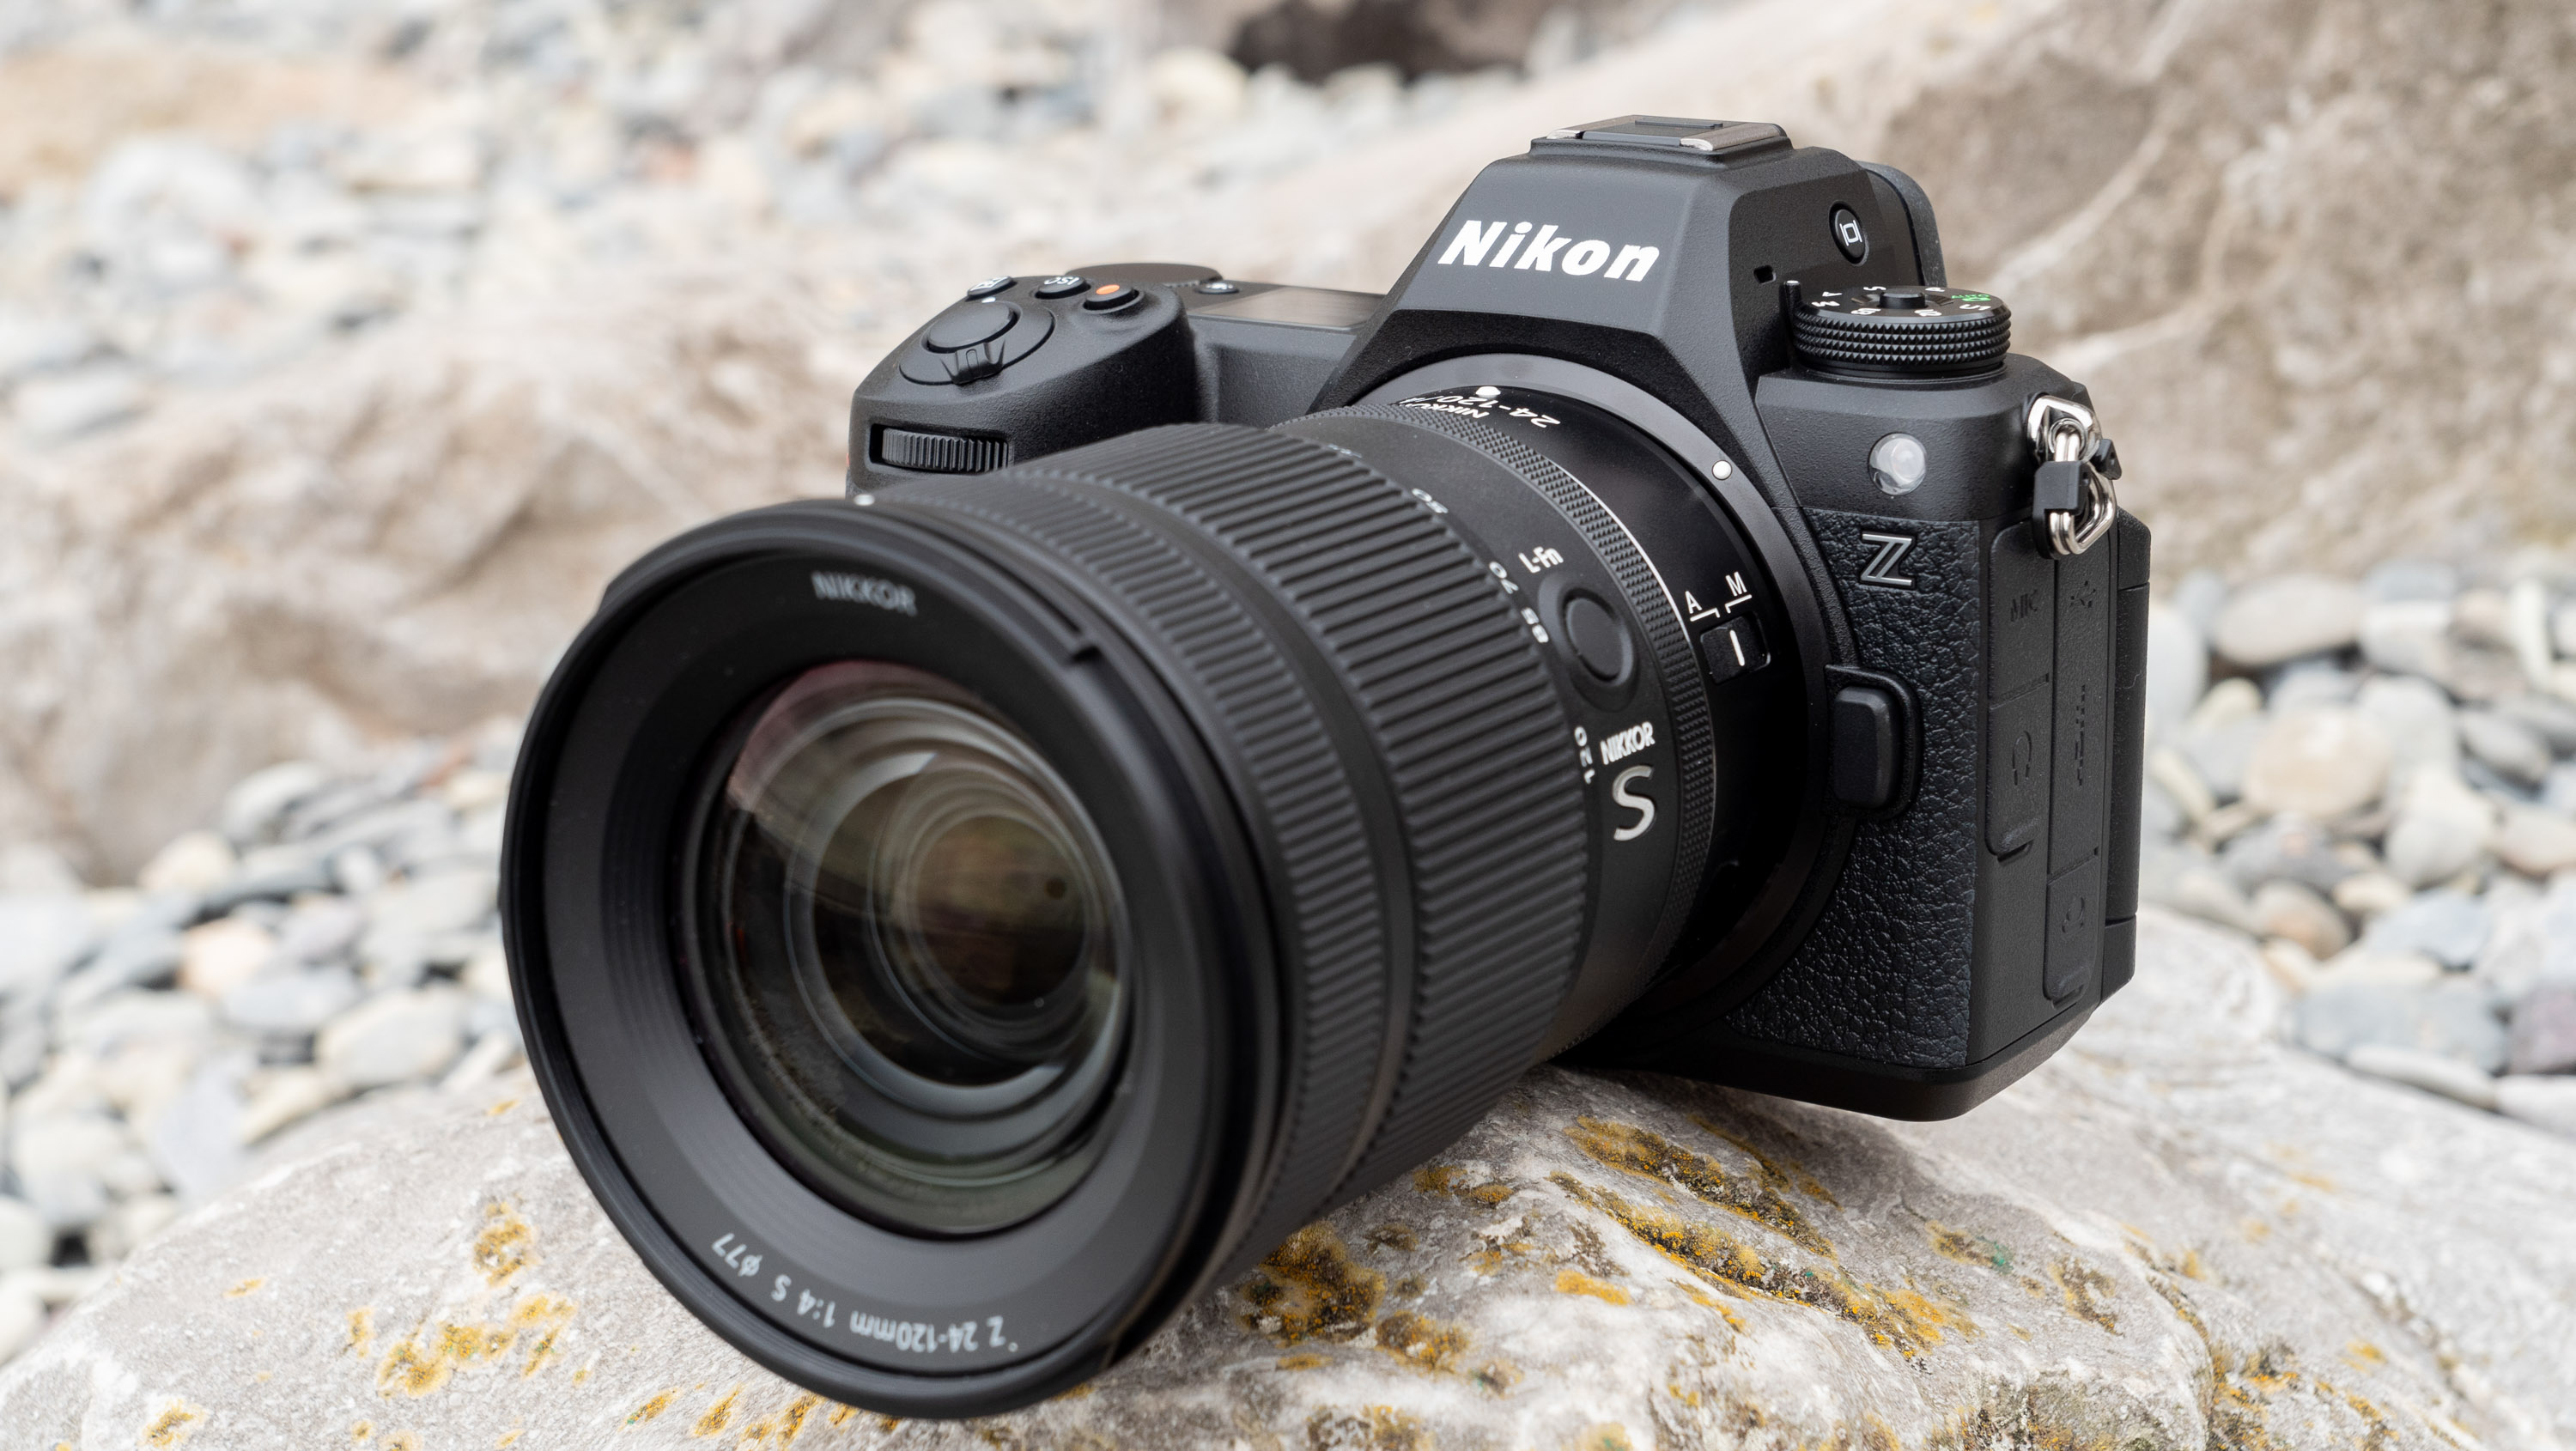 Nikon Z6 III with the 24-120mm f/4 lens